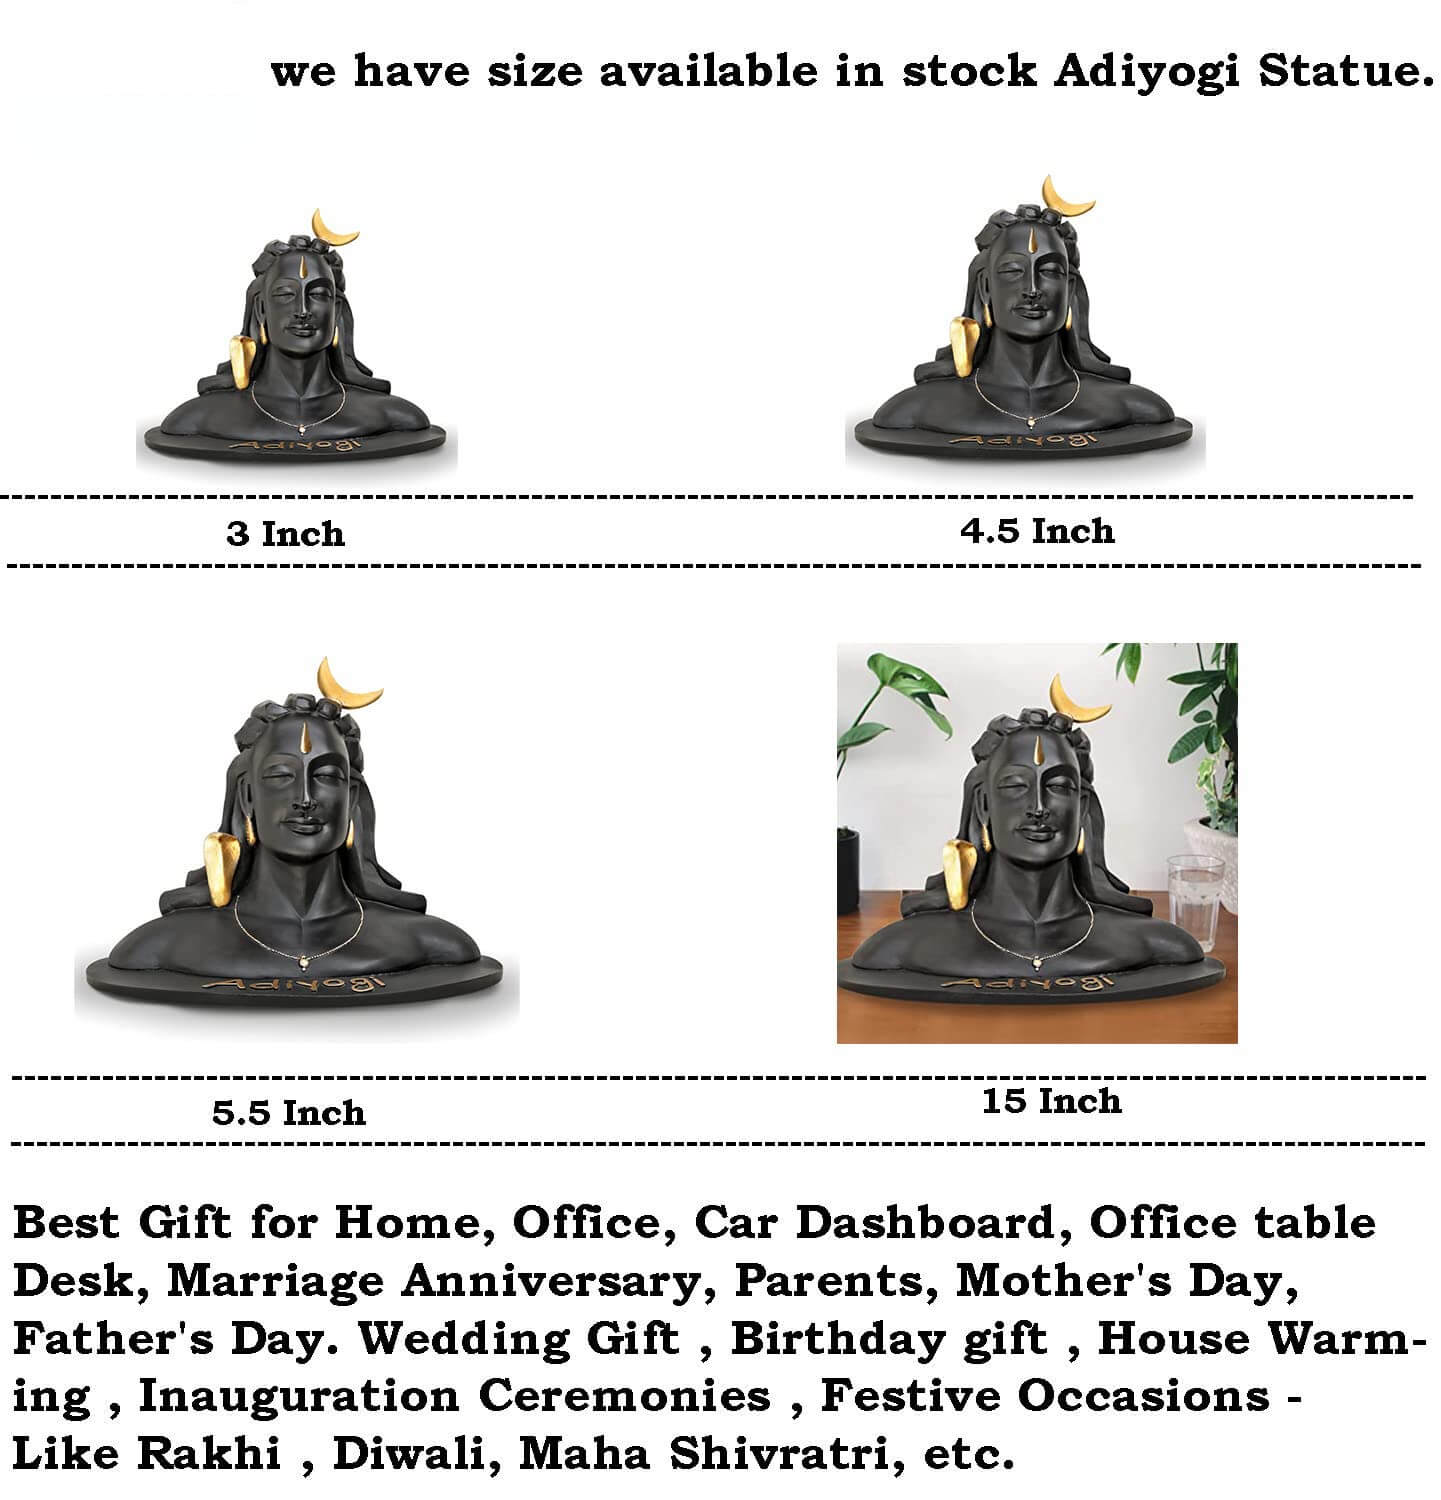 https://mangalfashions.com/cdn/shop/products/3-inch-Adiyogi-Statue-with-Rudraksha-Mala-for-Car-Accessories-for-Dashboard-Pooja-Gift-Decor-Items-for-Home-Office-Mangal-Fashions-Indian-Home-Decor-and-Craft-494.jpg?v=1681618710&width=1445